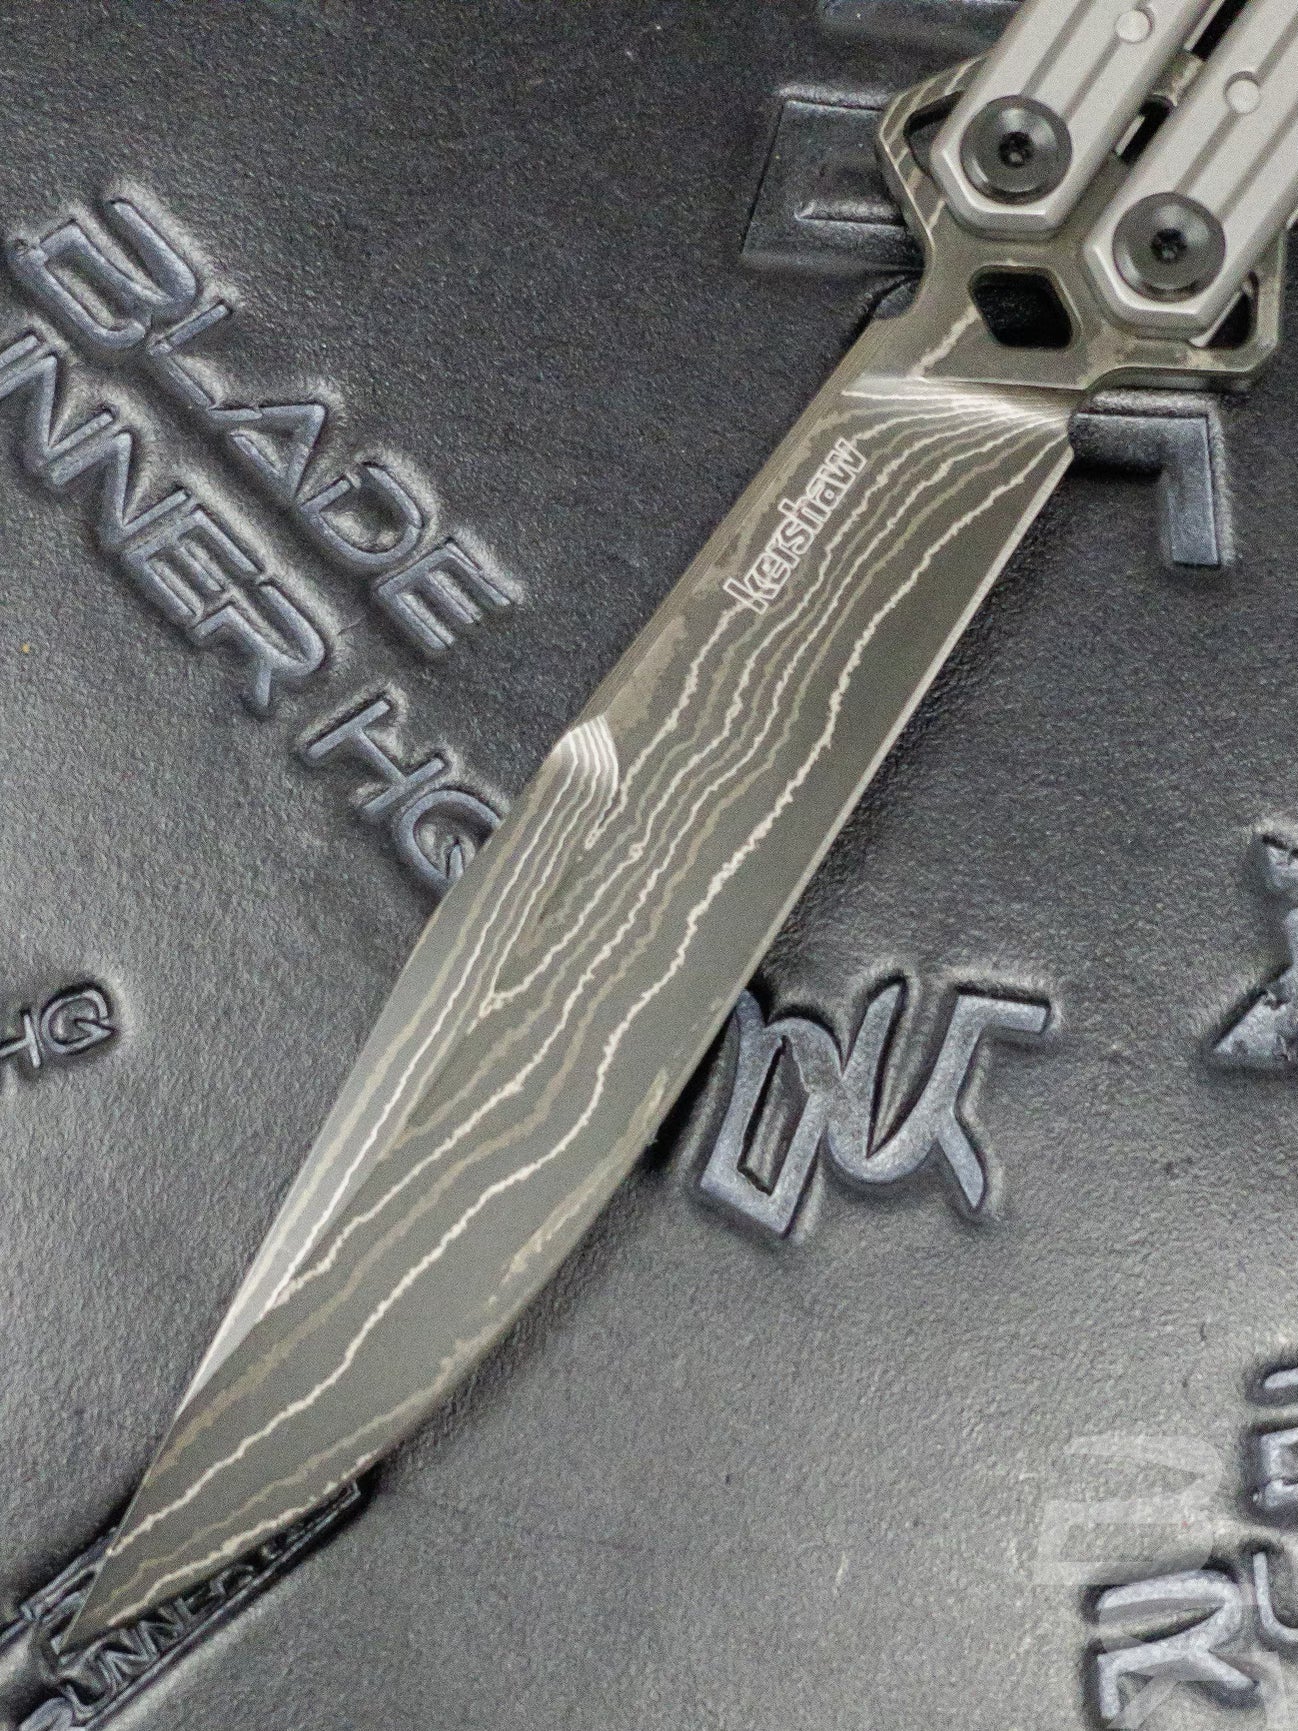 Kershaw Lucha Damascus Butterfly